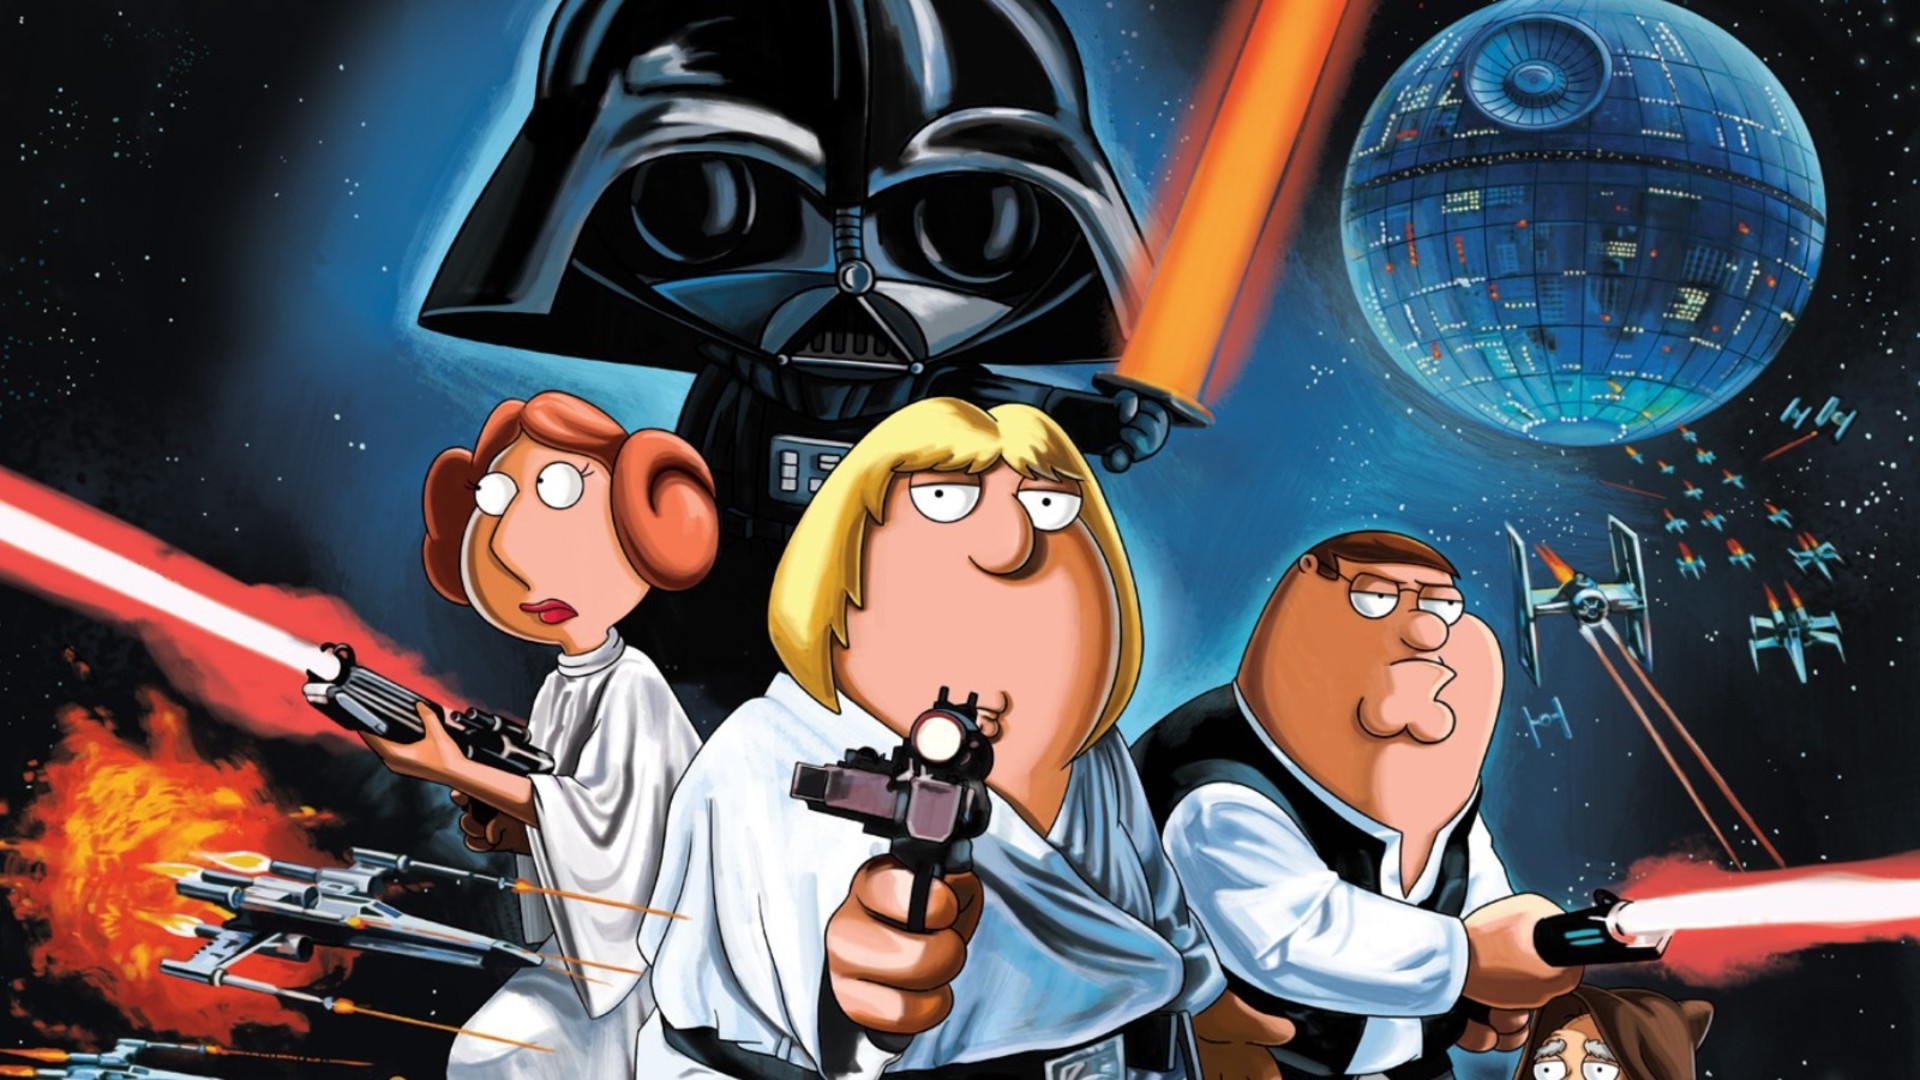 Family Guy Star Wars Background , HD Wallpaper & Backgrounds